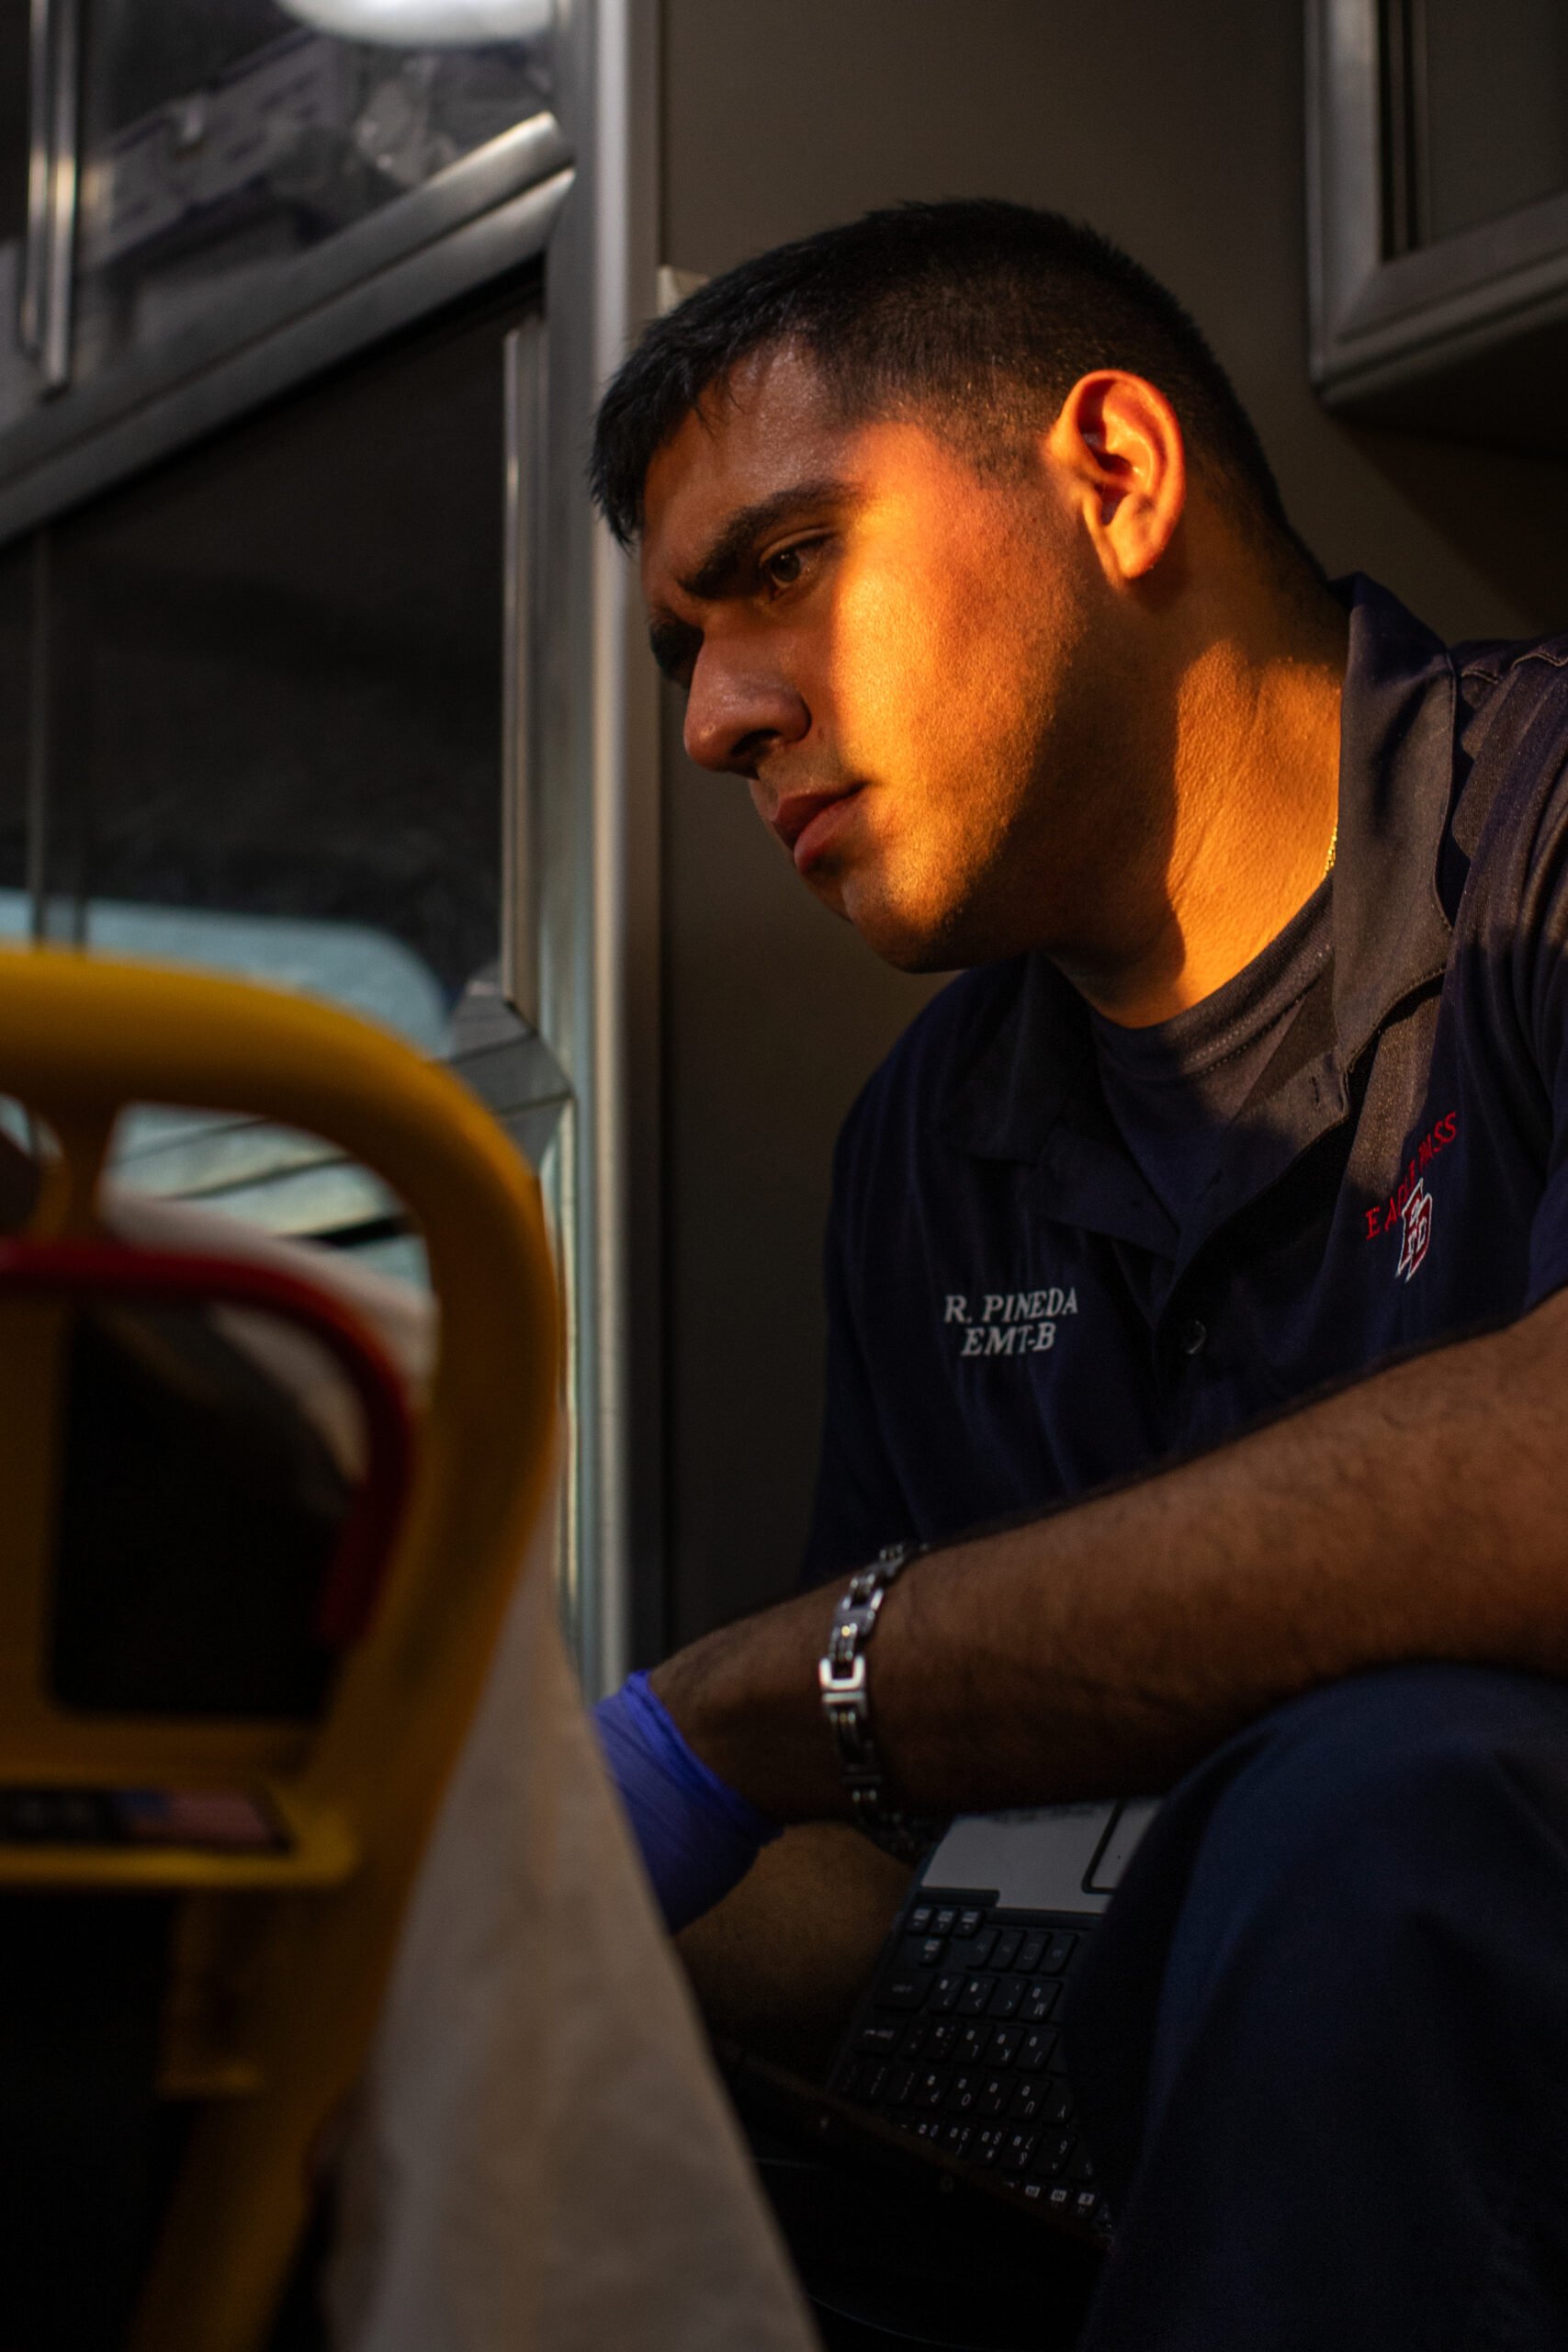 A photo depicting Firefighter EMT Rodrigo Pineda, 30, who asks about an older woman’s medical history as she’s transported to the Fort Duncan Regional Medical Center for swelling in her legs.